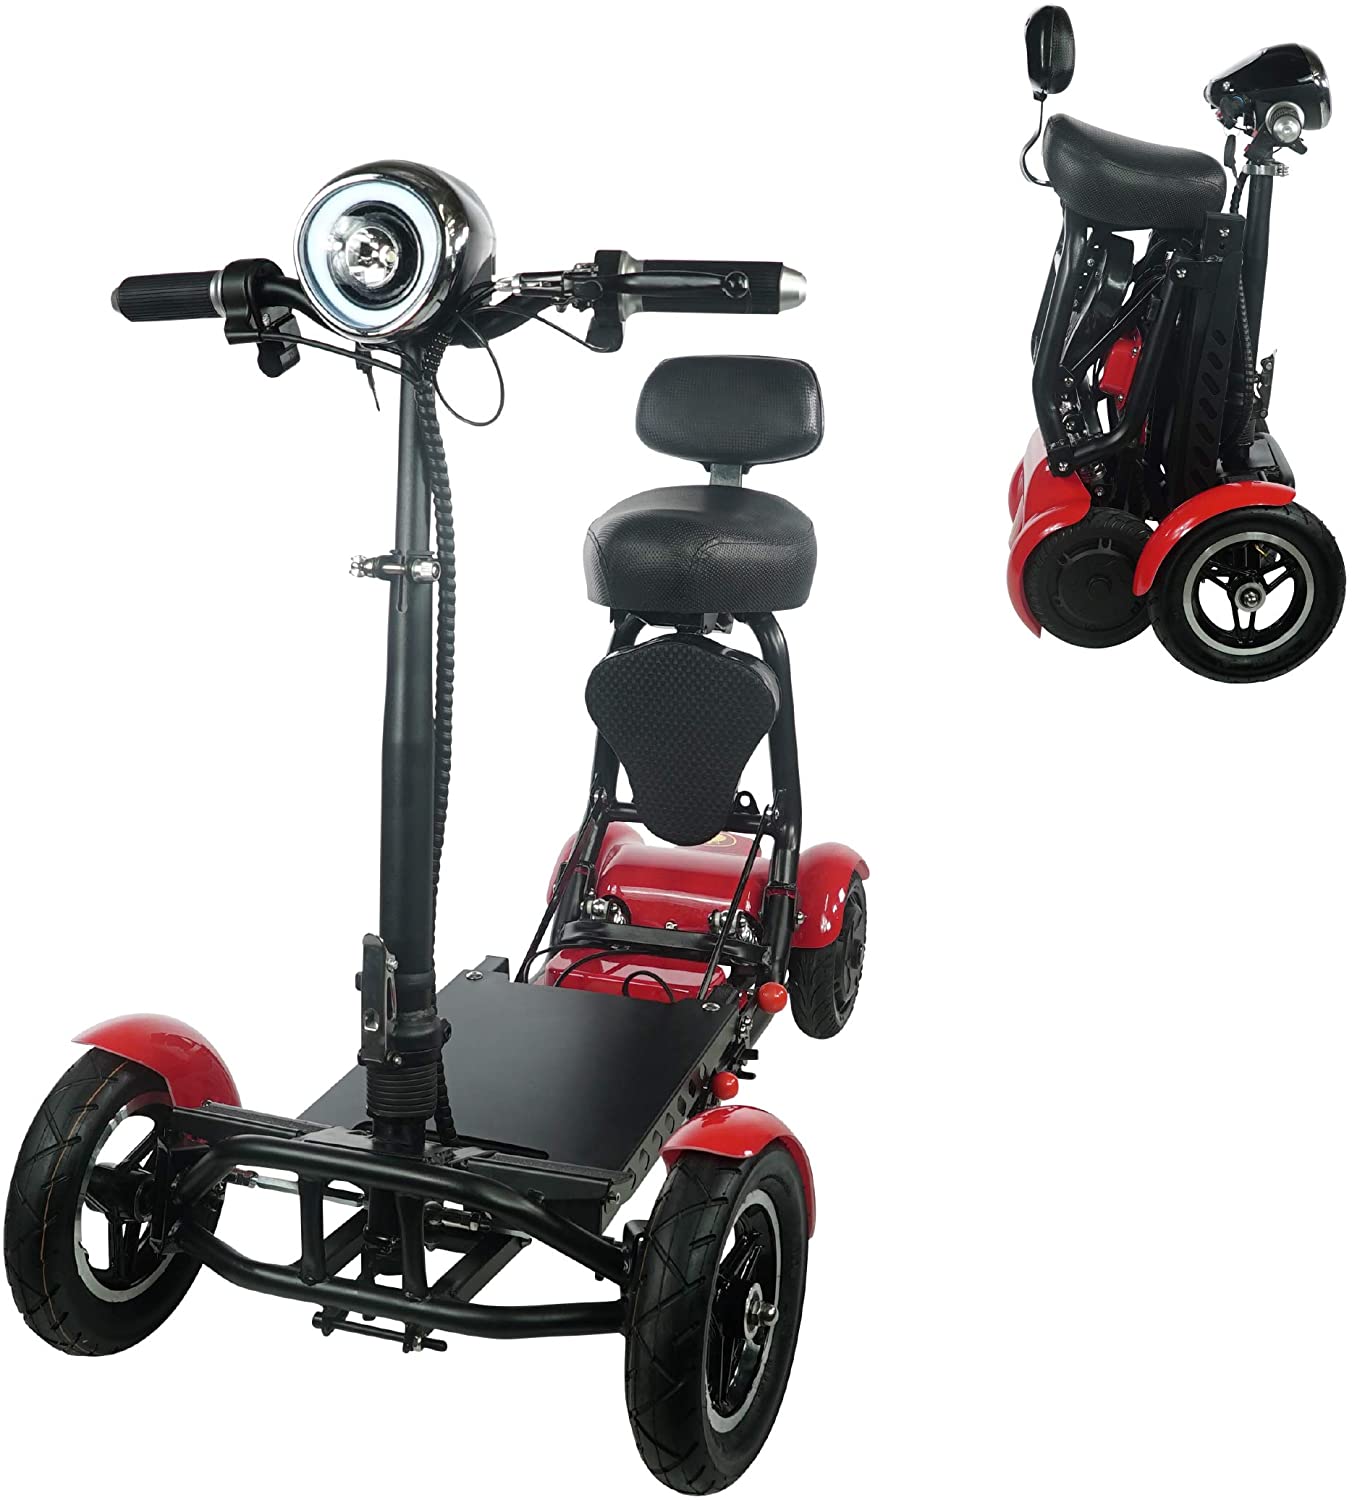 Top 10 Best Electric Wheelchair in 2022 - Top Best Pro Review